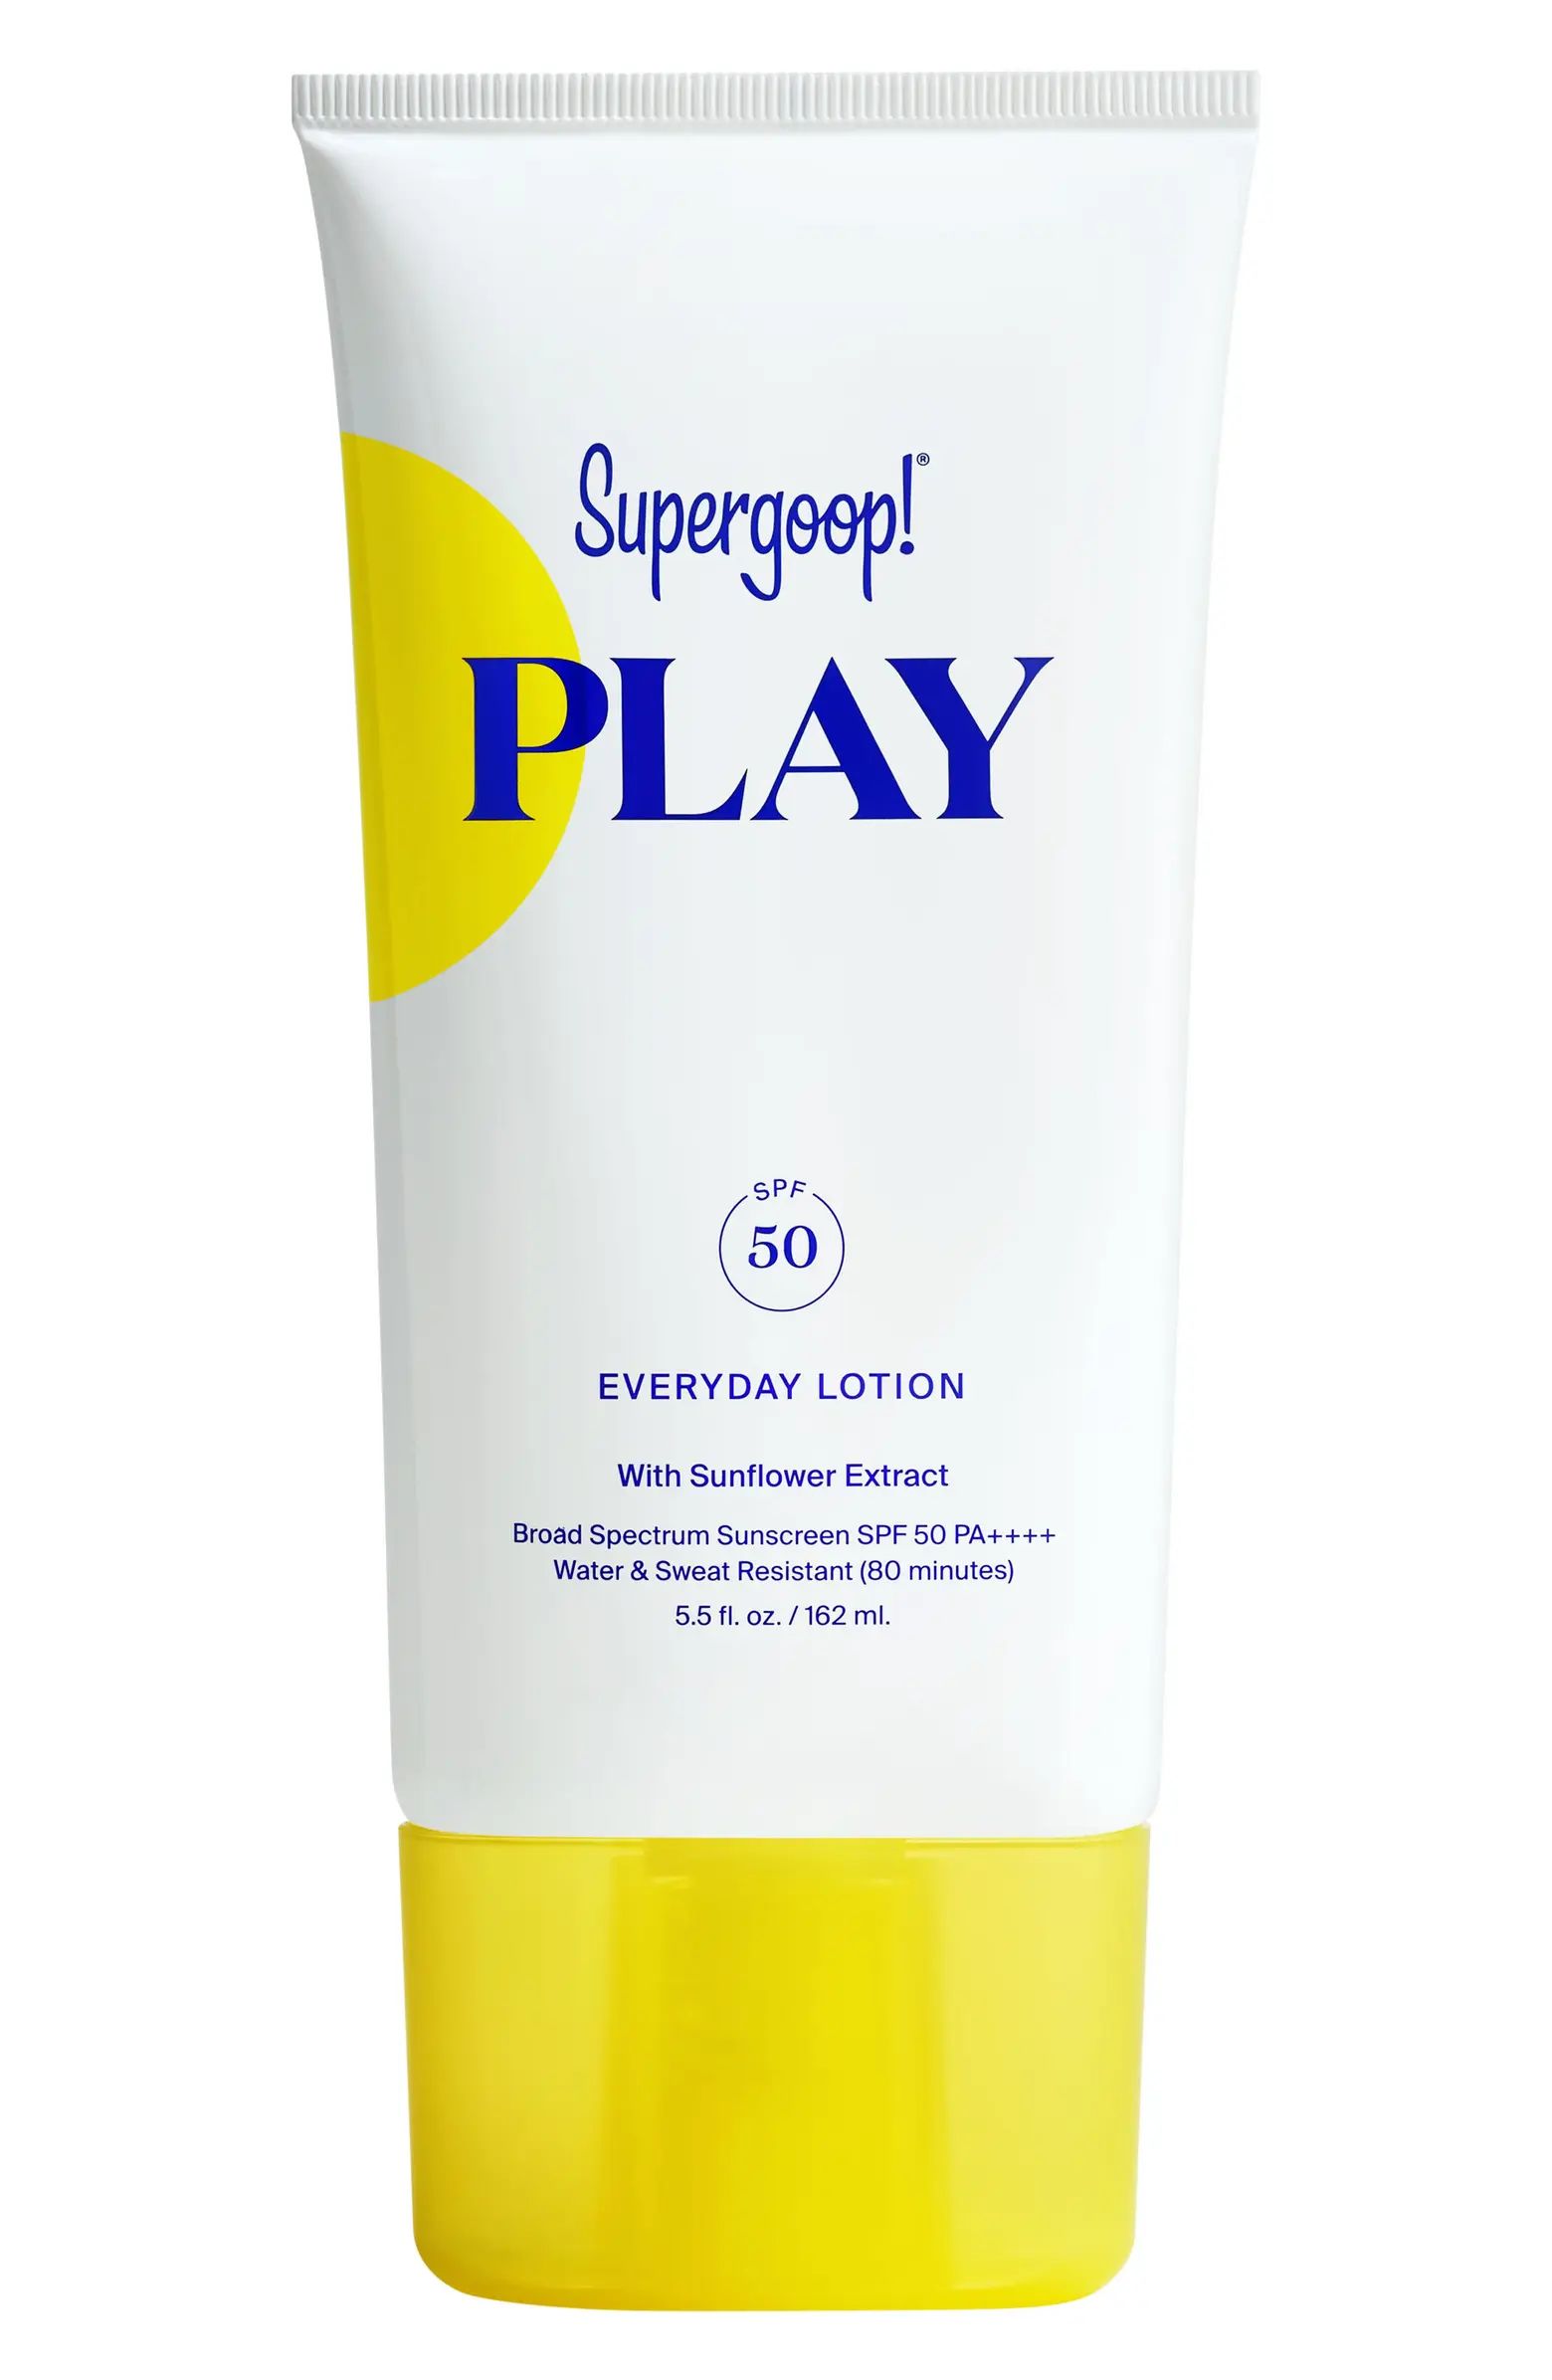 Supergoop! Play Everyday Lotion SPF 50 Sunscreen | Nordstrom